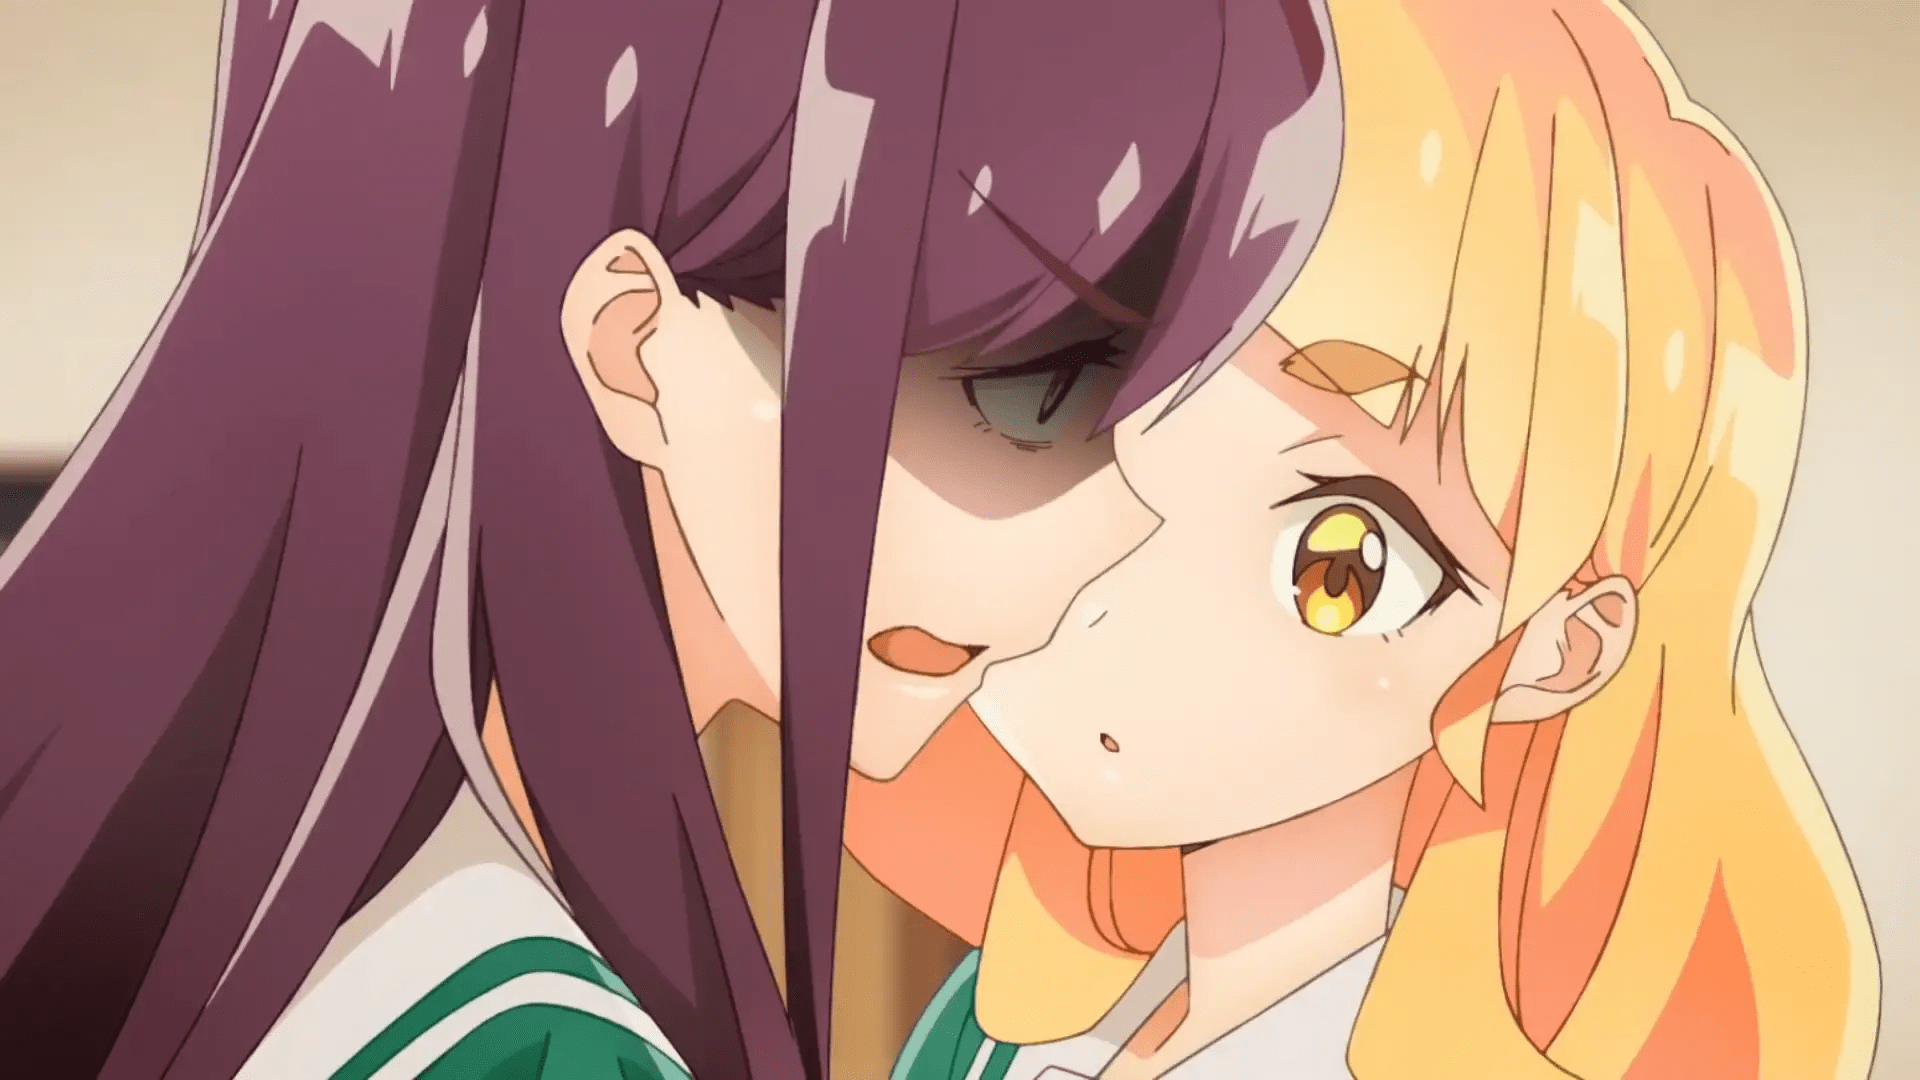 Mitsuki tells Hime what she really thinks of her